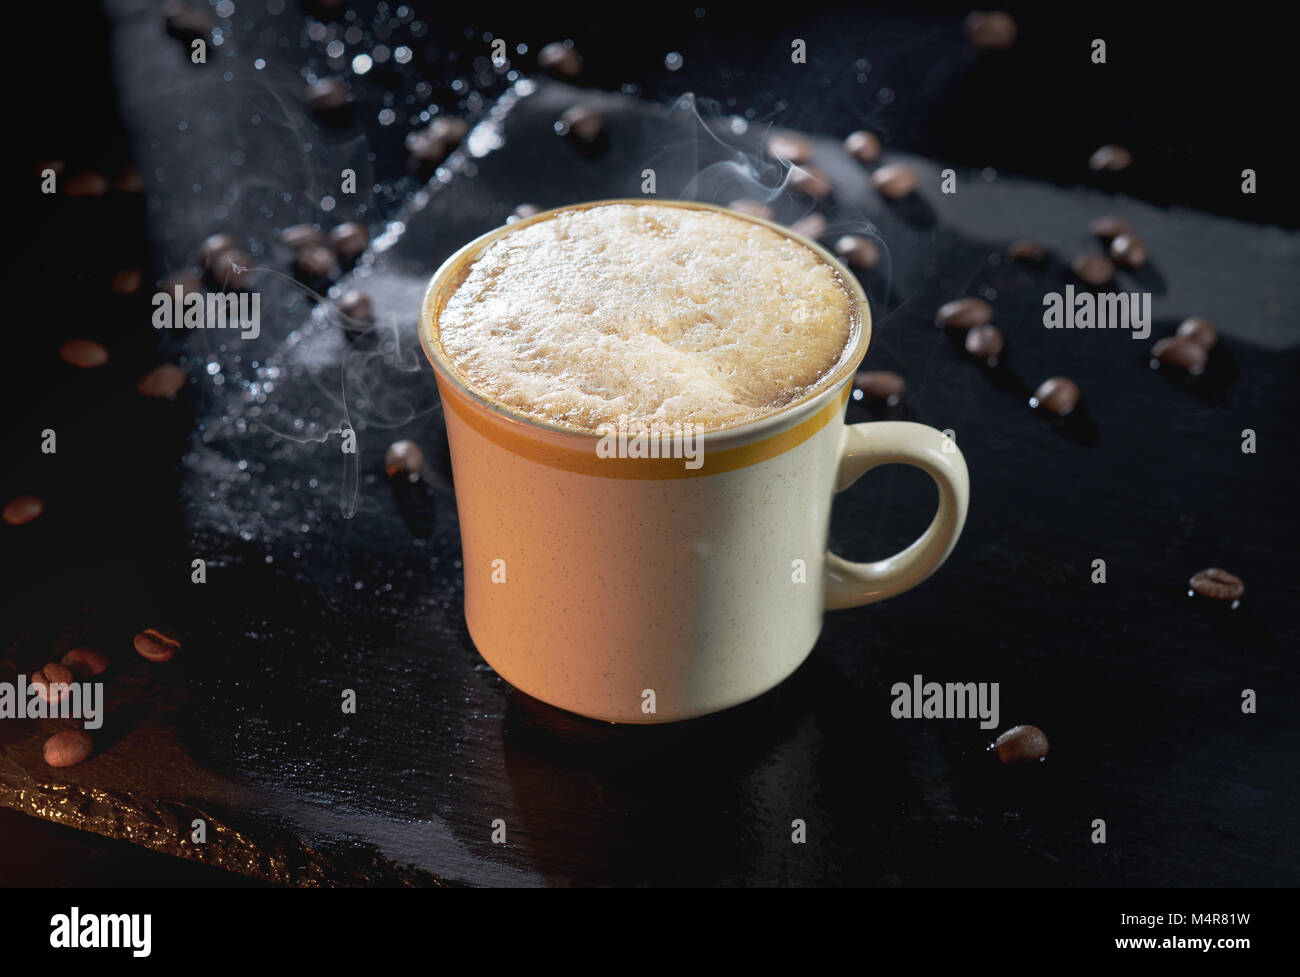 Piping hot coffee with white foam and steam surrounded by coffee beans Stock Photo